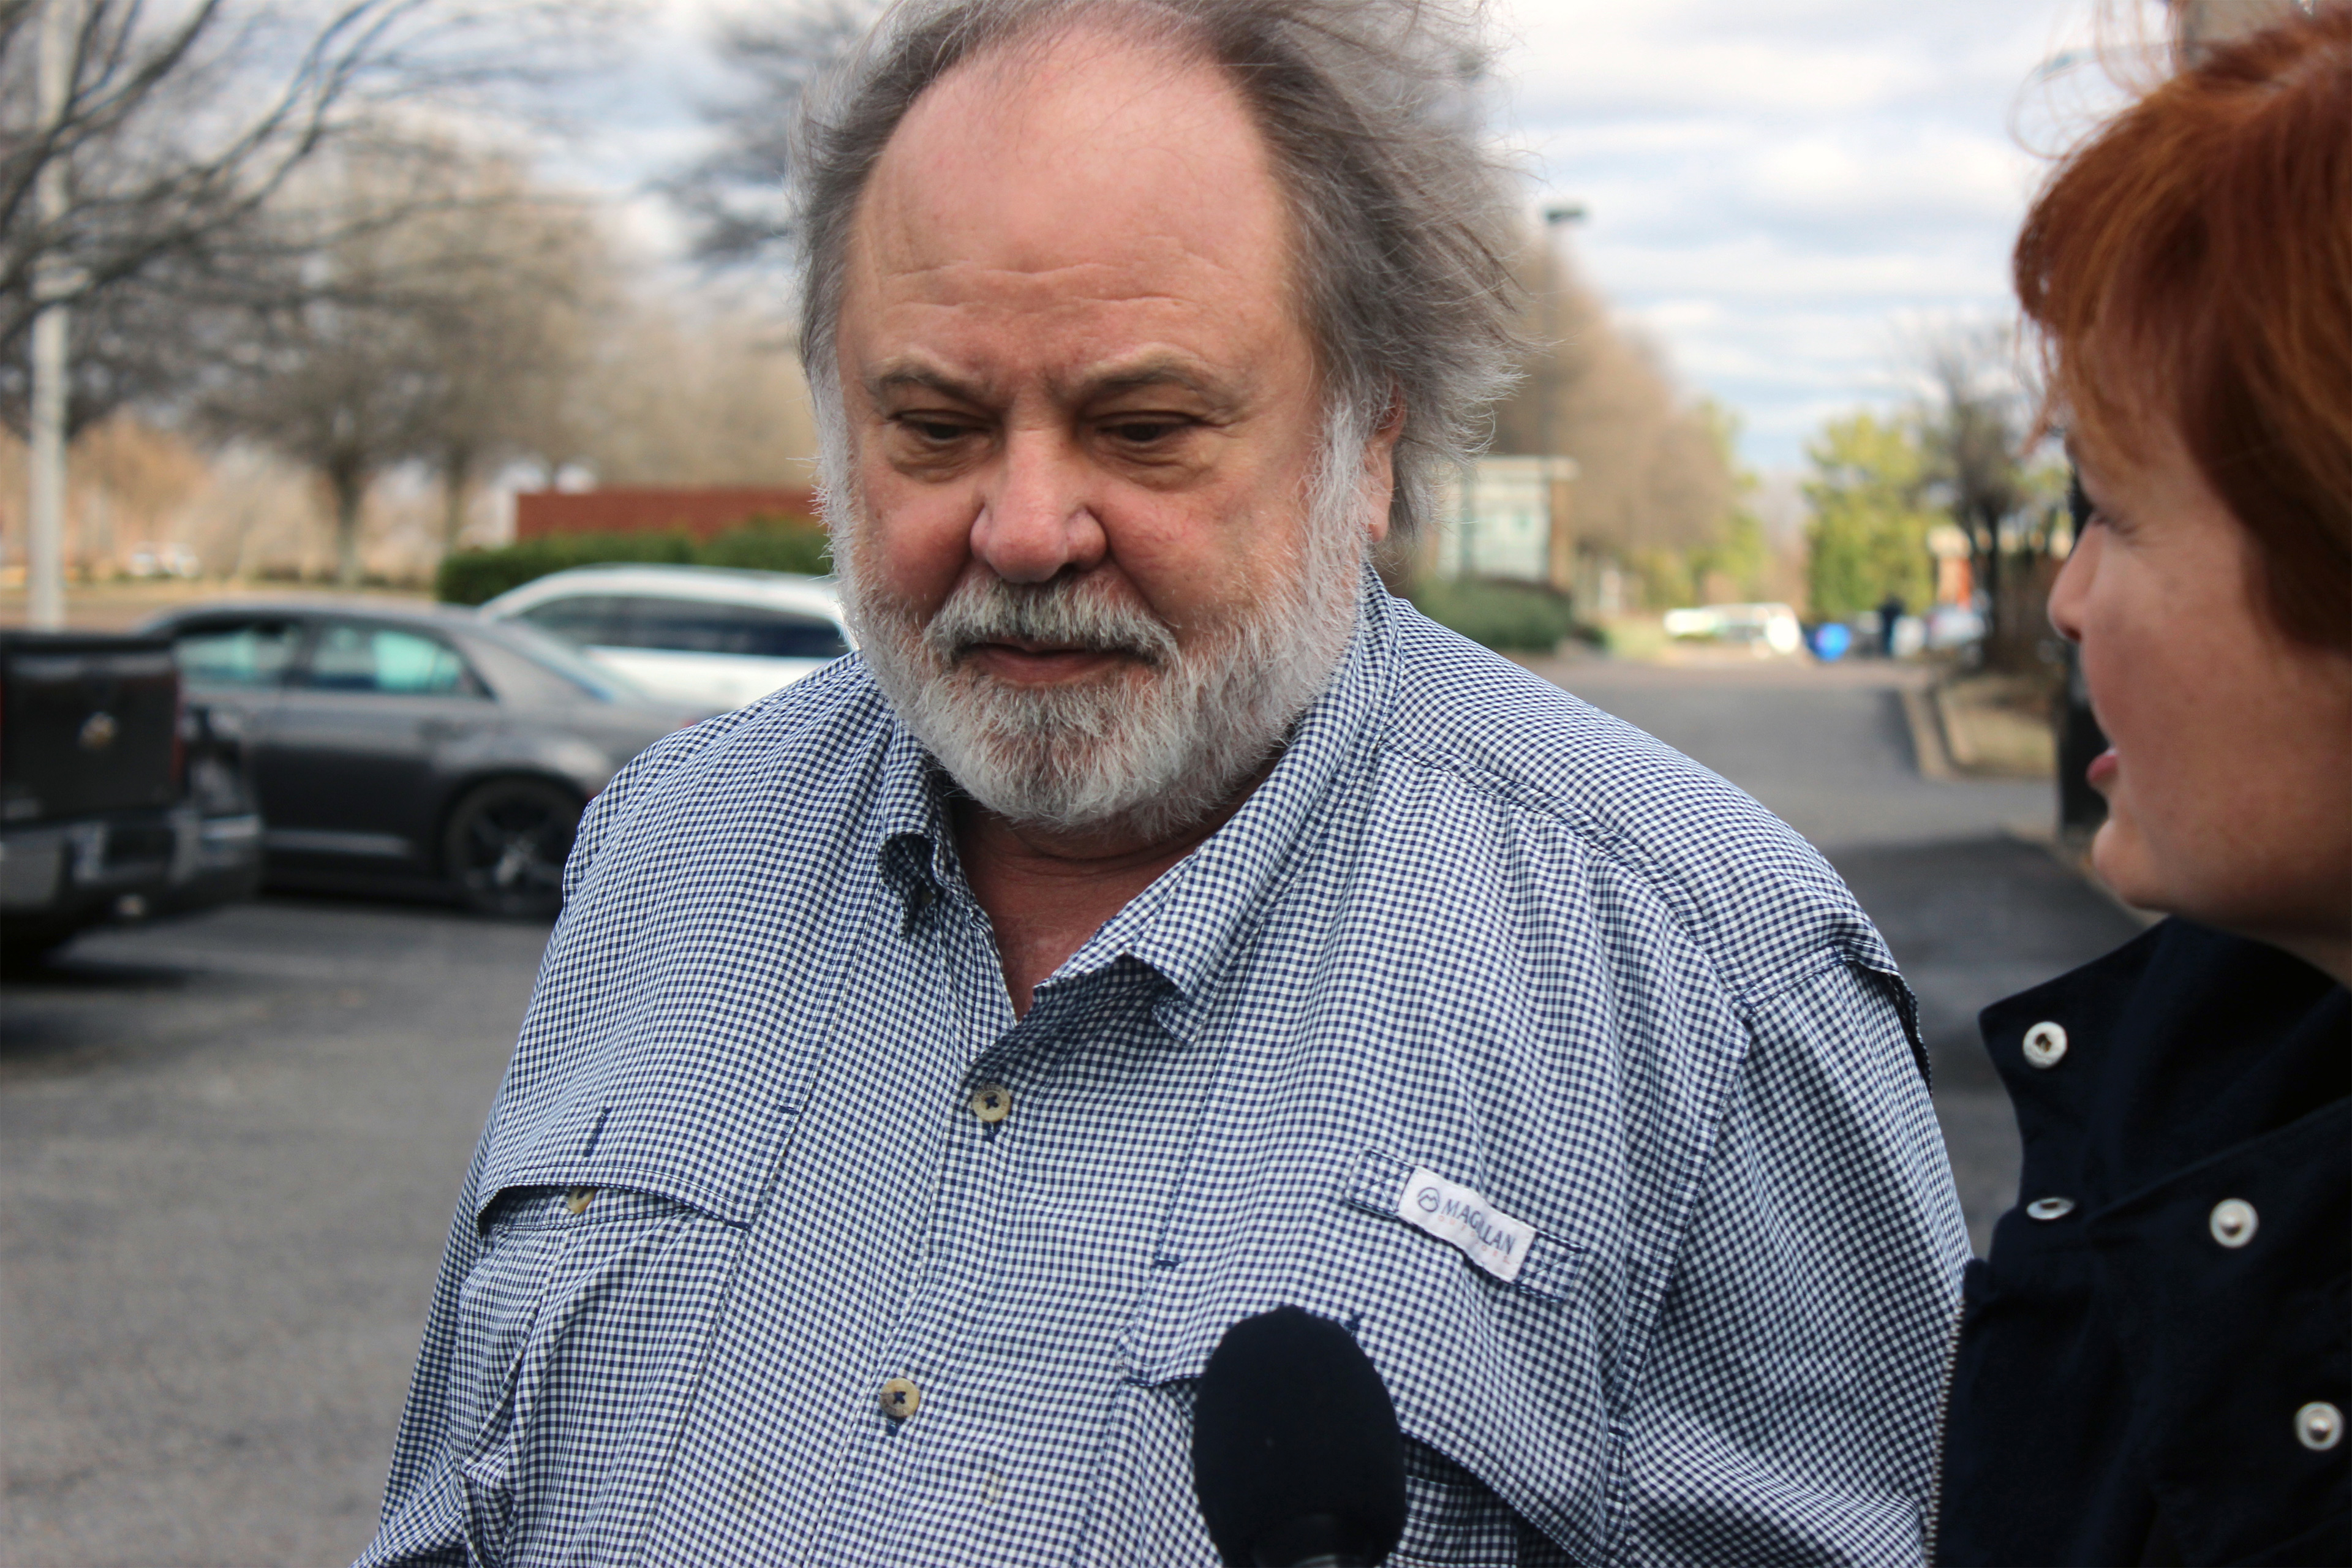 A photo shows a man walking outside as a reporter holds a microphone in front of him.